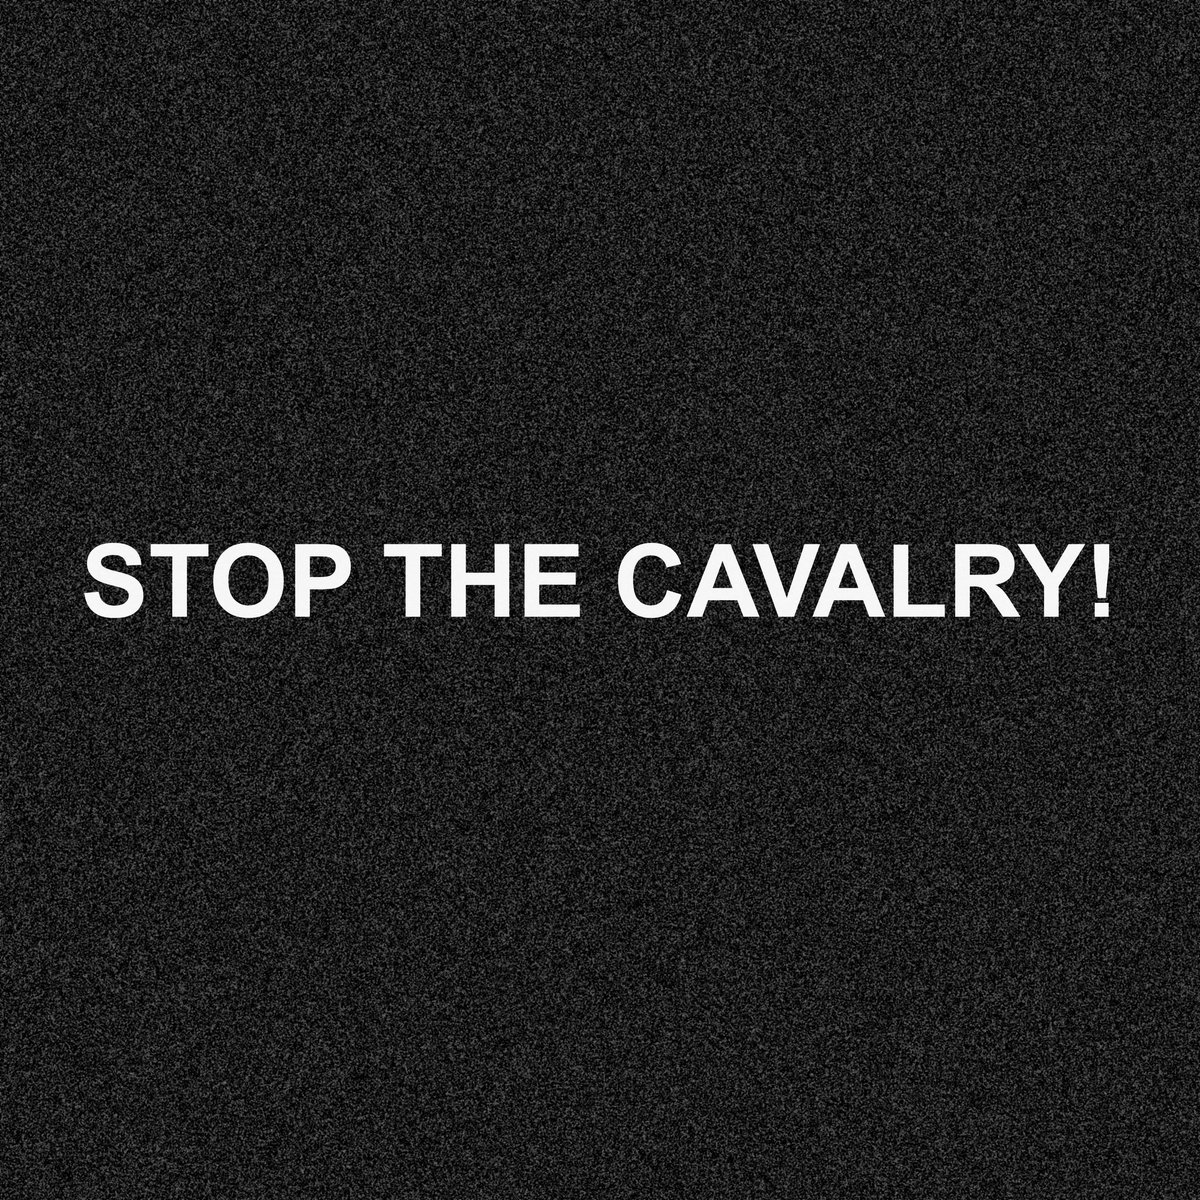 Cover of Jona Lewie’s STOP THE CAVALRY! To raise money for @savechildrenuk Gaza Emergency Appeal. bigspecial.bandcamp.com/track/stop-the…